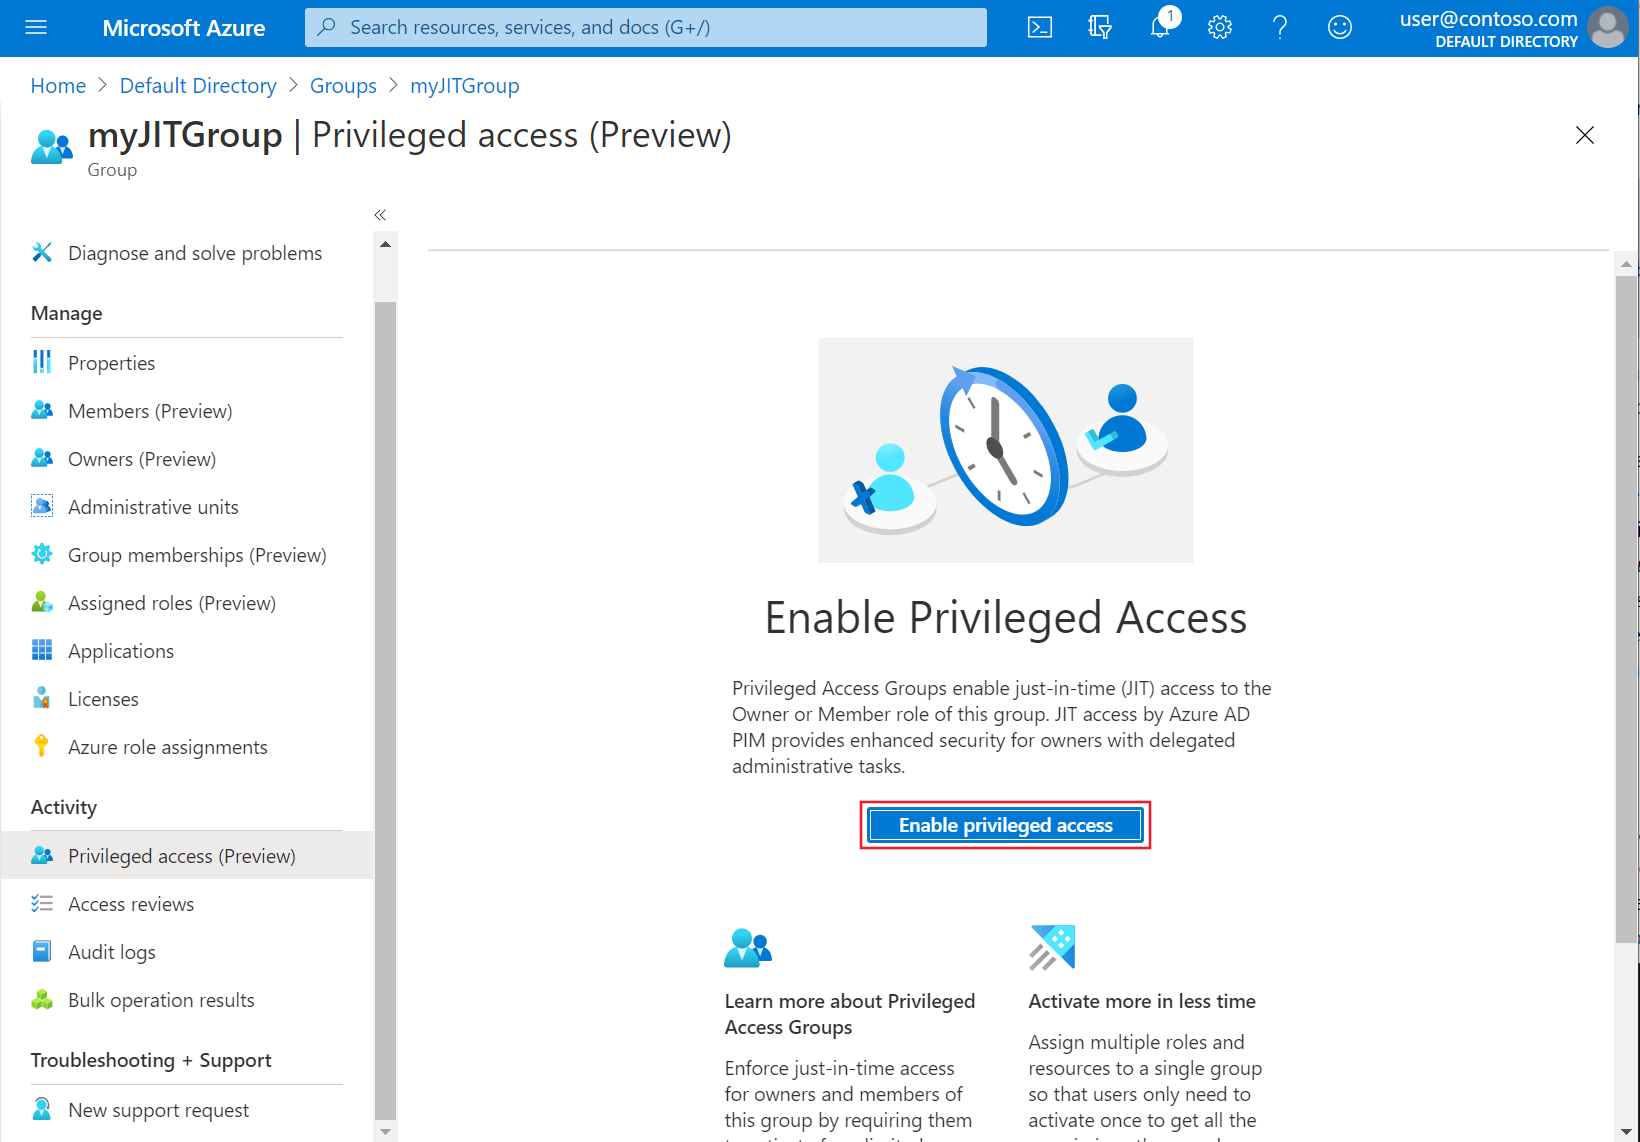 The Azure portal's Privileged access (Preview) page is shown, with 'Enable privileged access' highlighted